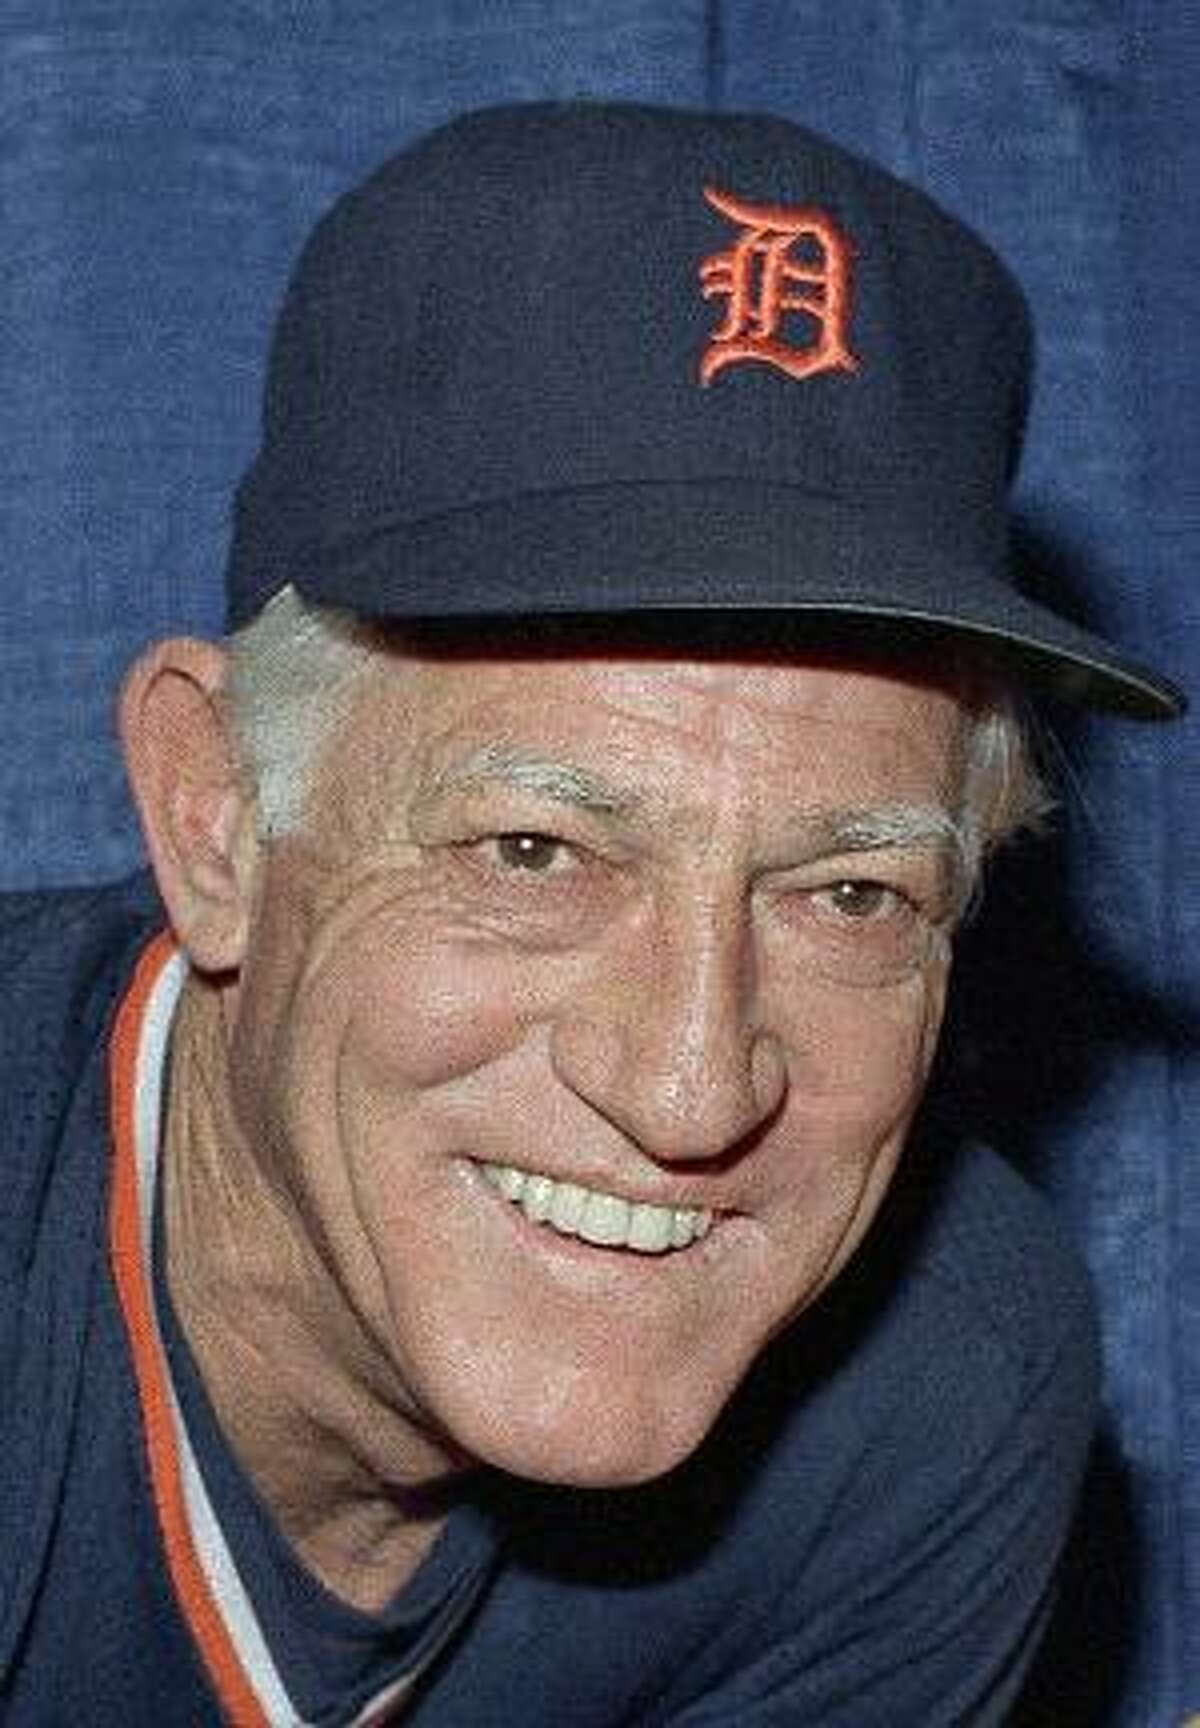 Baseball Hall of Fame manager Sparky Anderson dead at 76; Managed the Reds  and Tigers to championships